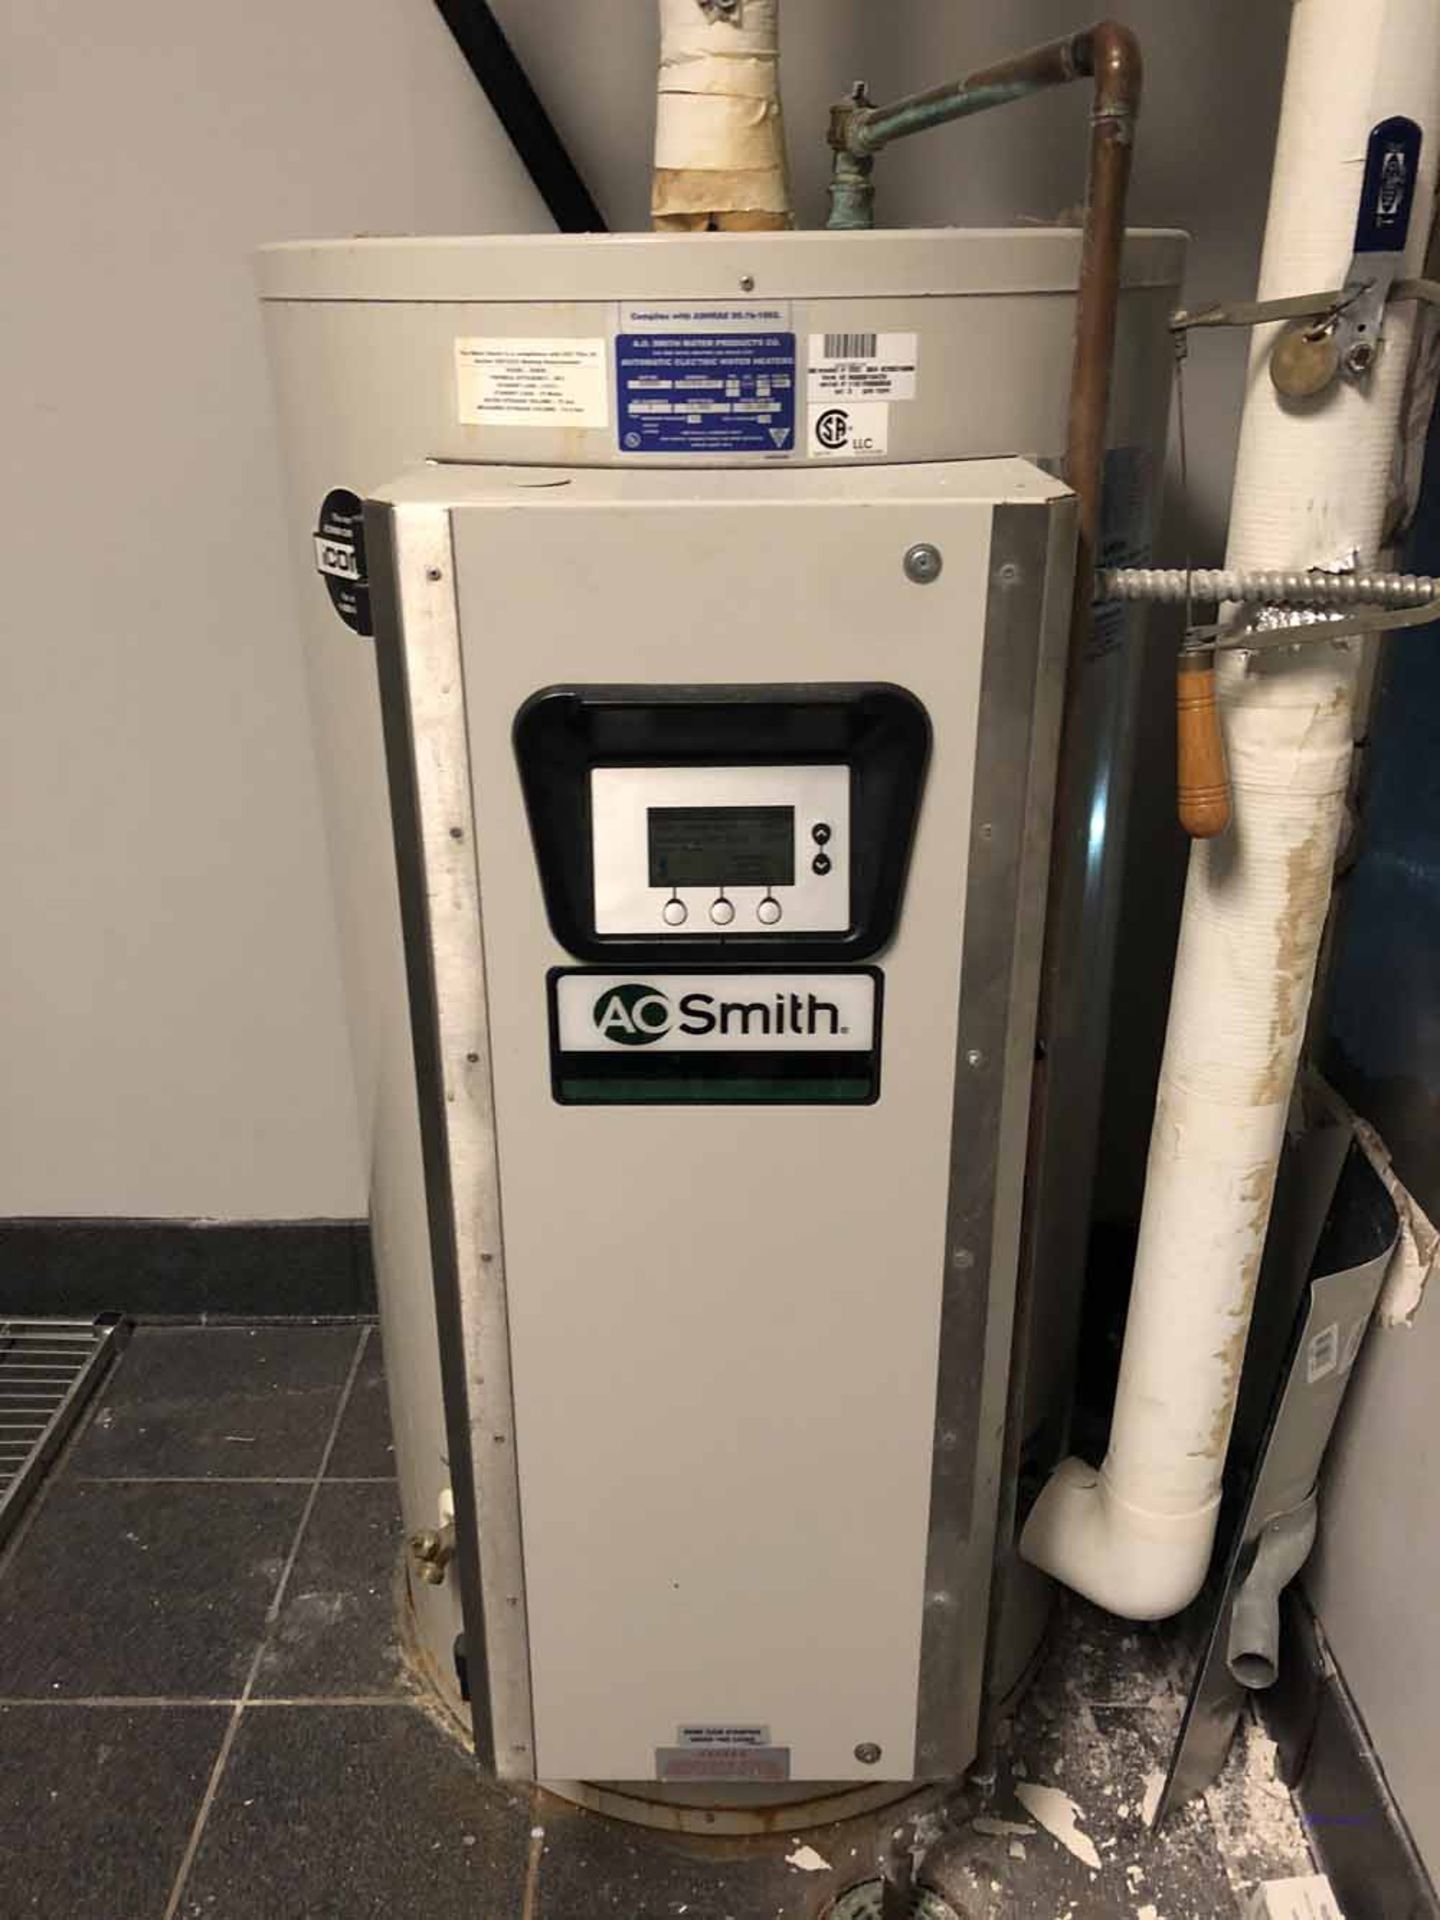 AO Smith DSE 80 12 KW Dura-Power Commercial Electric Water Heater